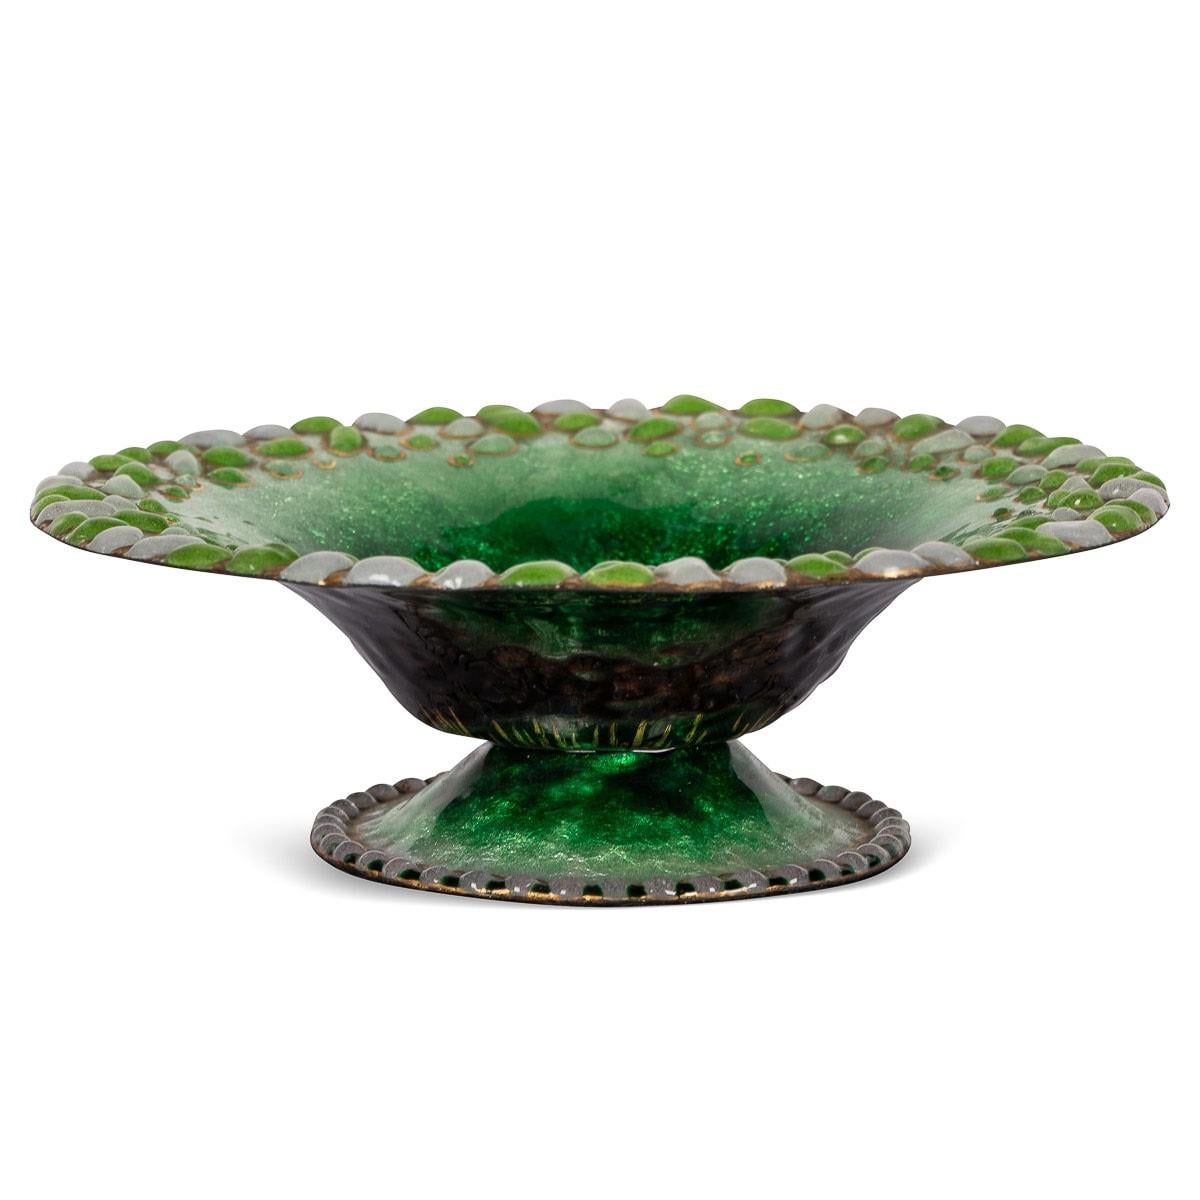 Mid-20th French enamel bowl by Duban et Christel, Limoges. This beautiful, yet small enamelled bowl is in the shallow flared form, the centre well in deep emerald-green with an ombre finish to a lighter green, surrounded by raindrop reliefs with